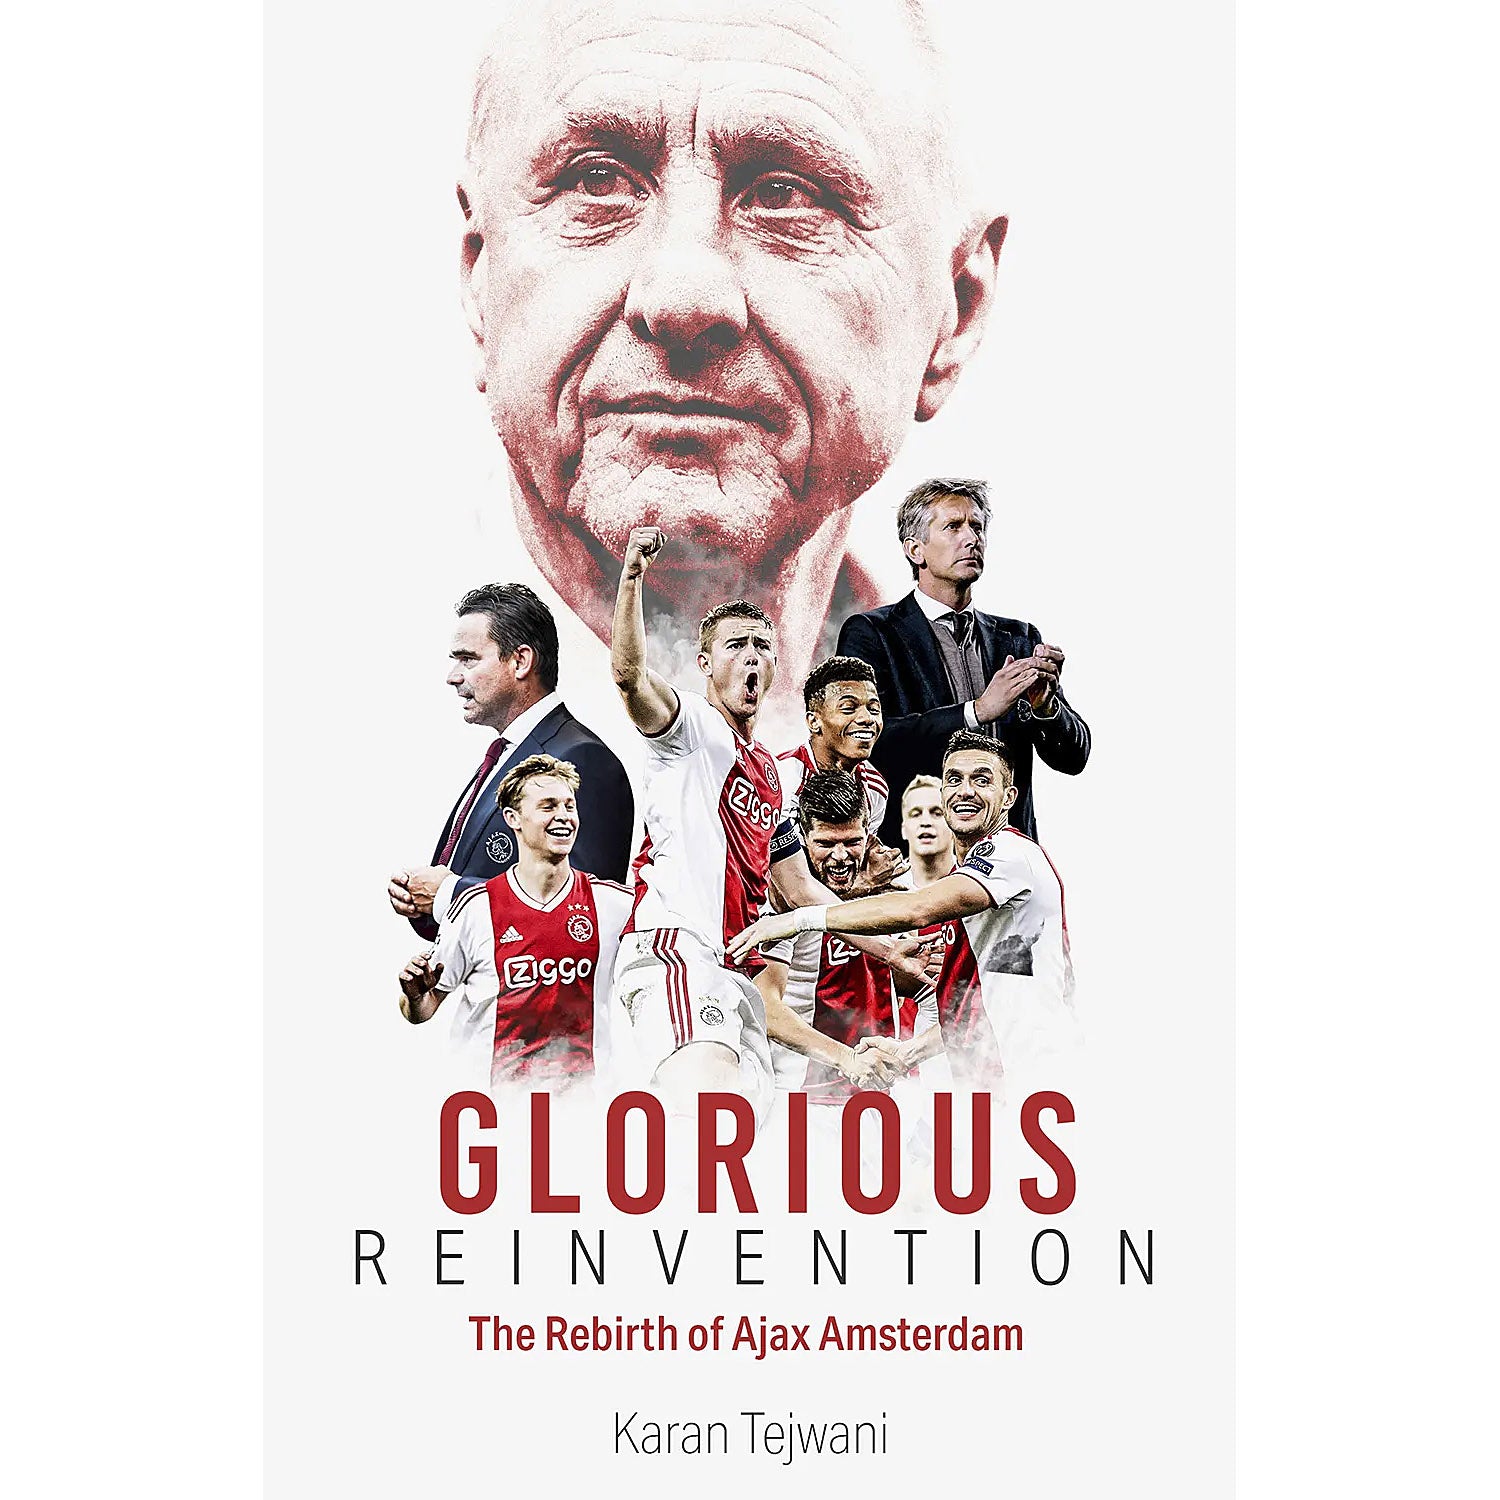 Glorious Reinvention – The Rebirth of Ajax Amsterdam